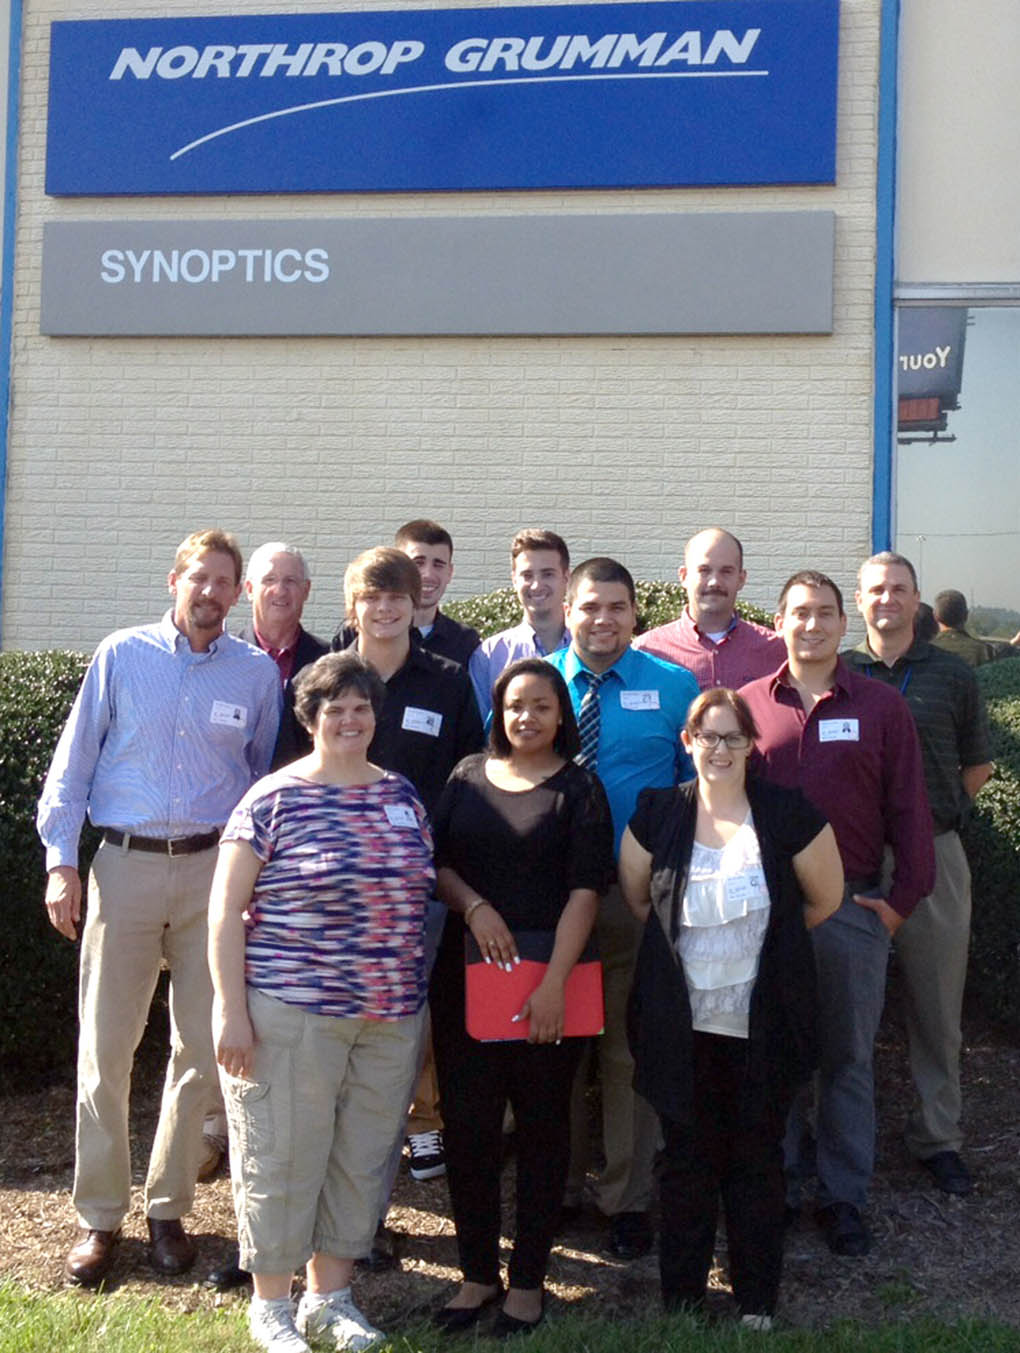 CCCC Laser and Photonics Technology students visit Charlotte